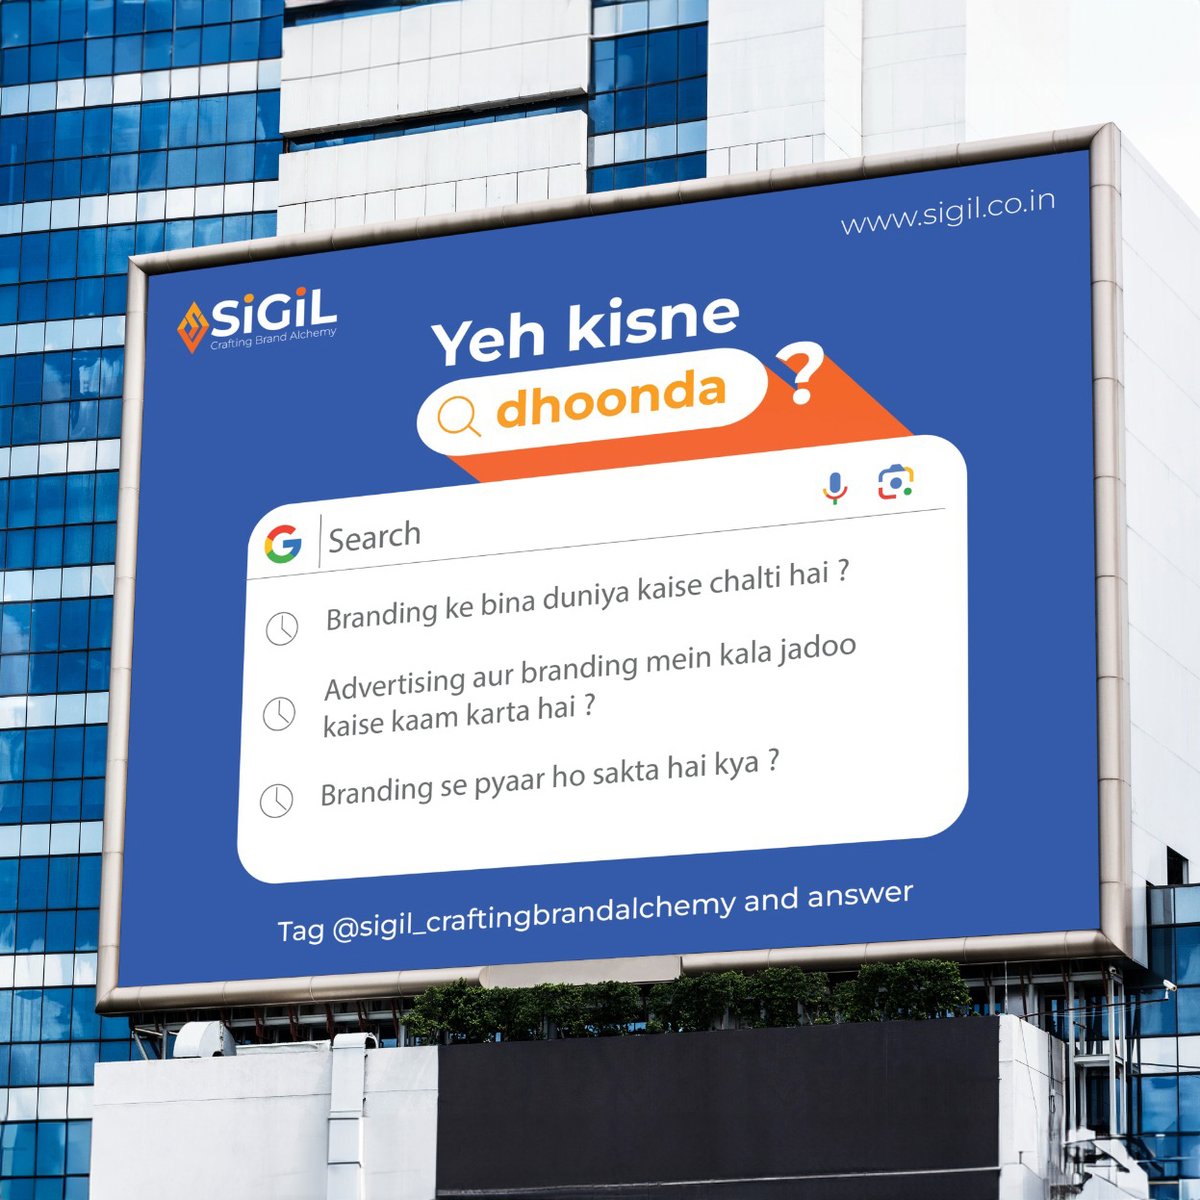 Is this your search history? Advertising and branding is complicated in today’s competitive market. So join us today to make it simple for your brand. Take your brand to next level with us. #yehkisnedhoonda

#sigil #SIGIL #creative #adsmatter #creativeads #marketing #advertising